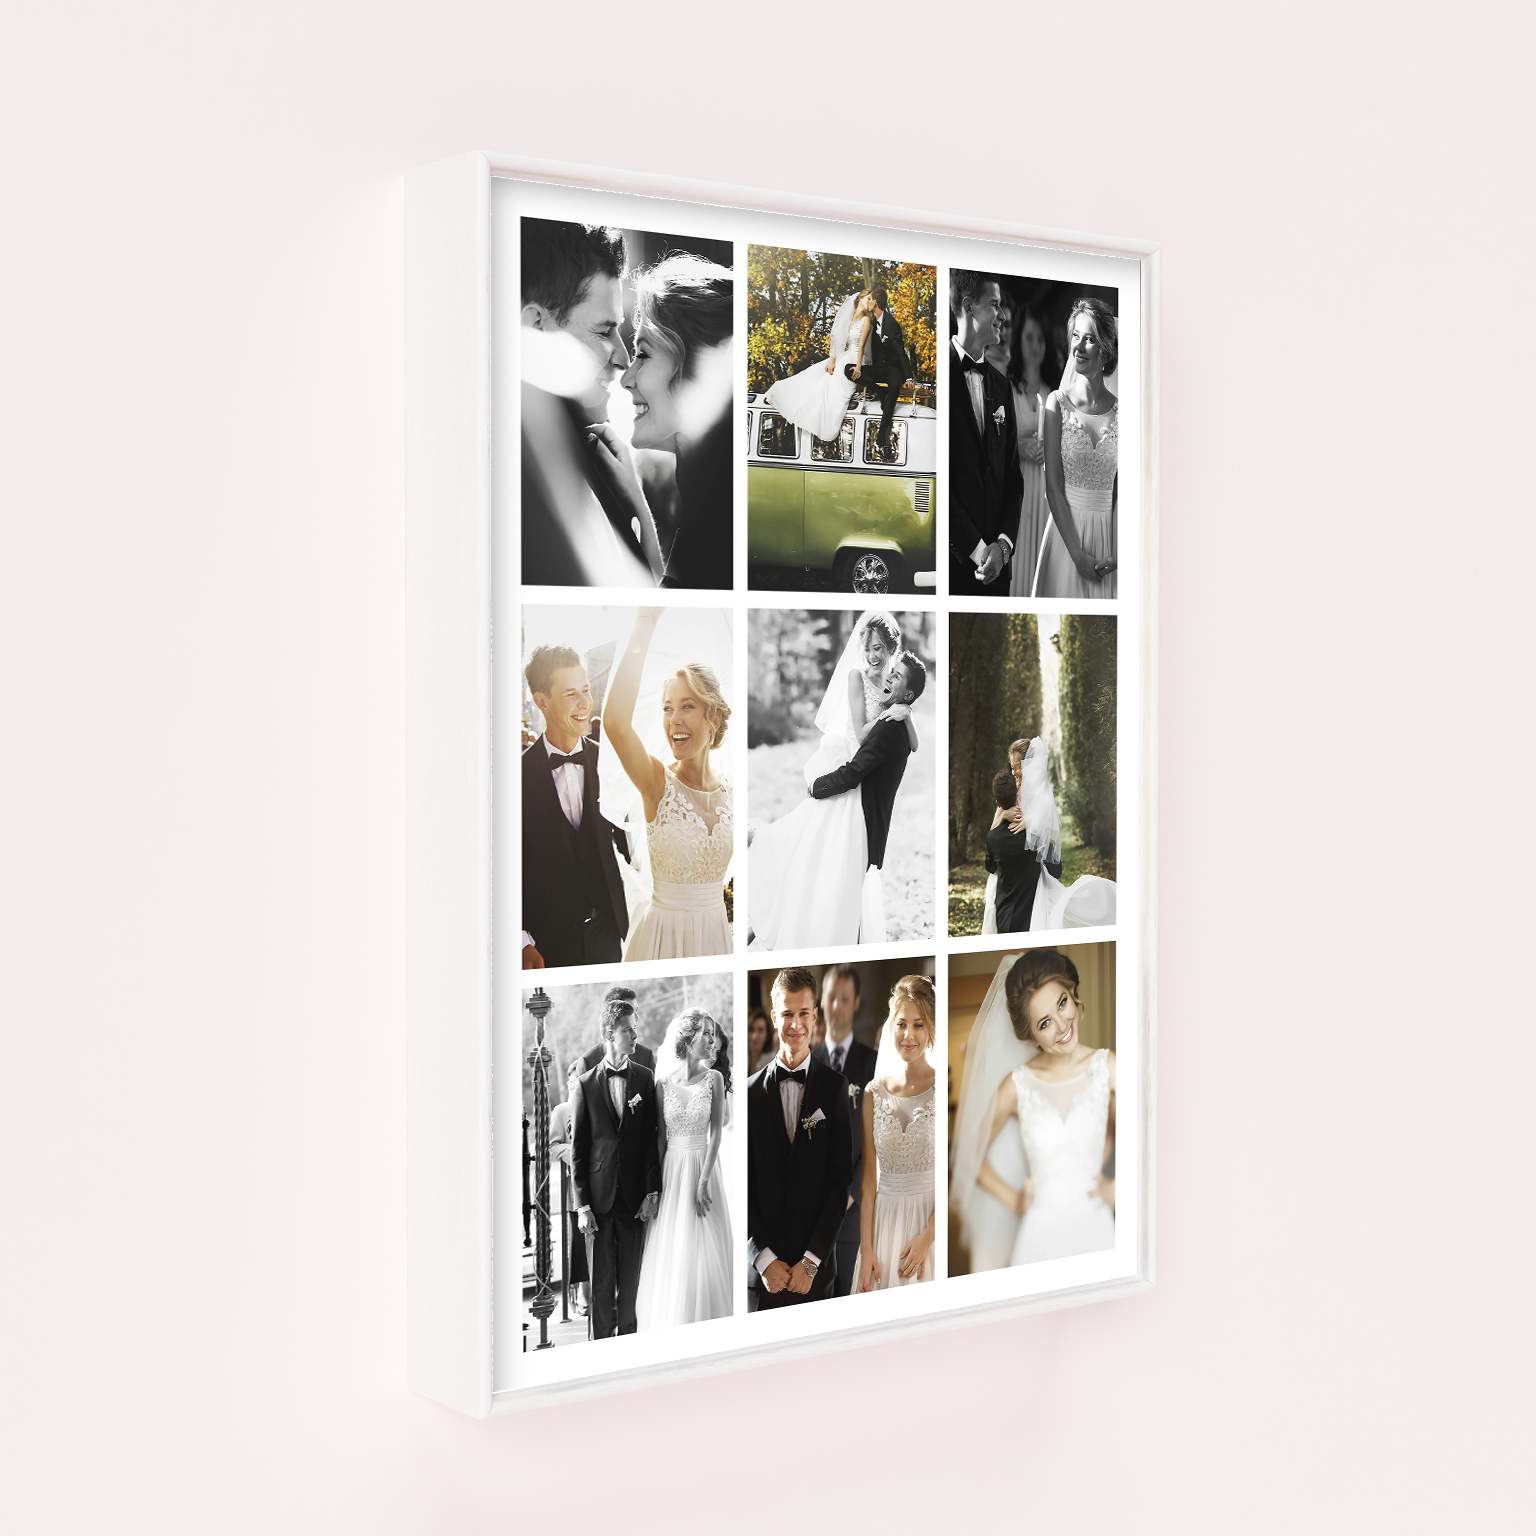 A Love Story Wall Art Framed Prints - Capture the chapters of a beautiful love story with this personalized portrait-oriented canvas. Showcase 9 photos in a heartfelt display, making it a versatile and meaningful gift for birthdays, anniversaries, or expressing love.